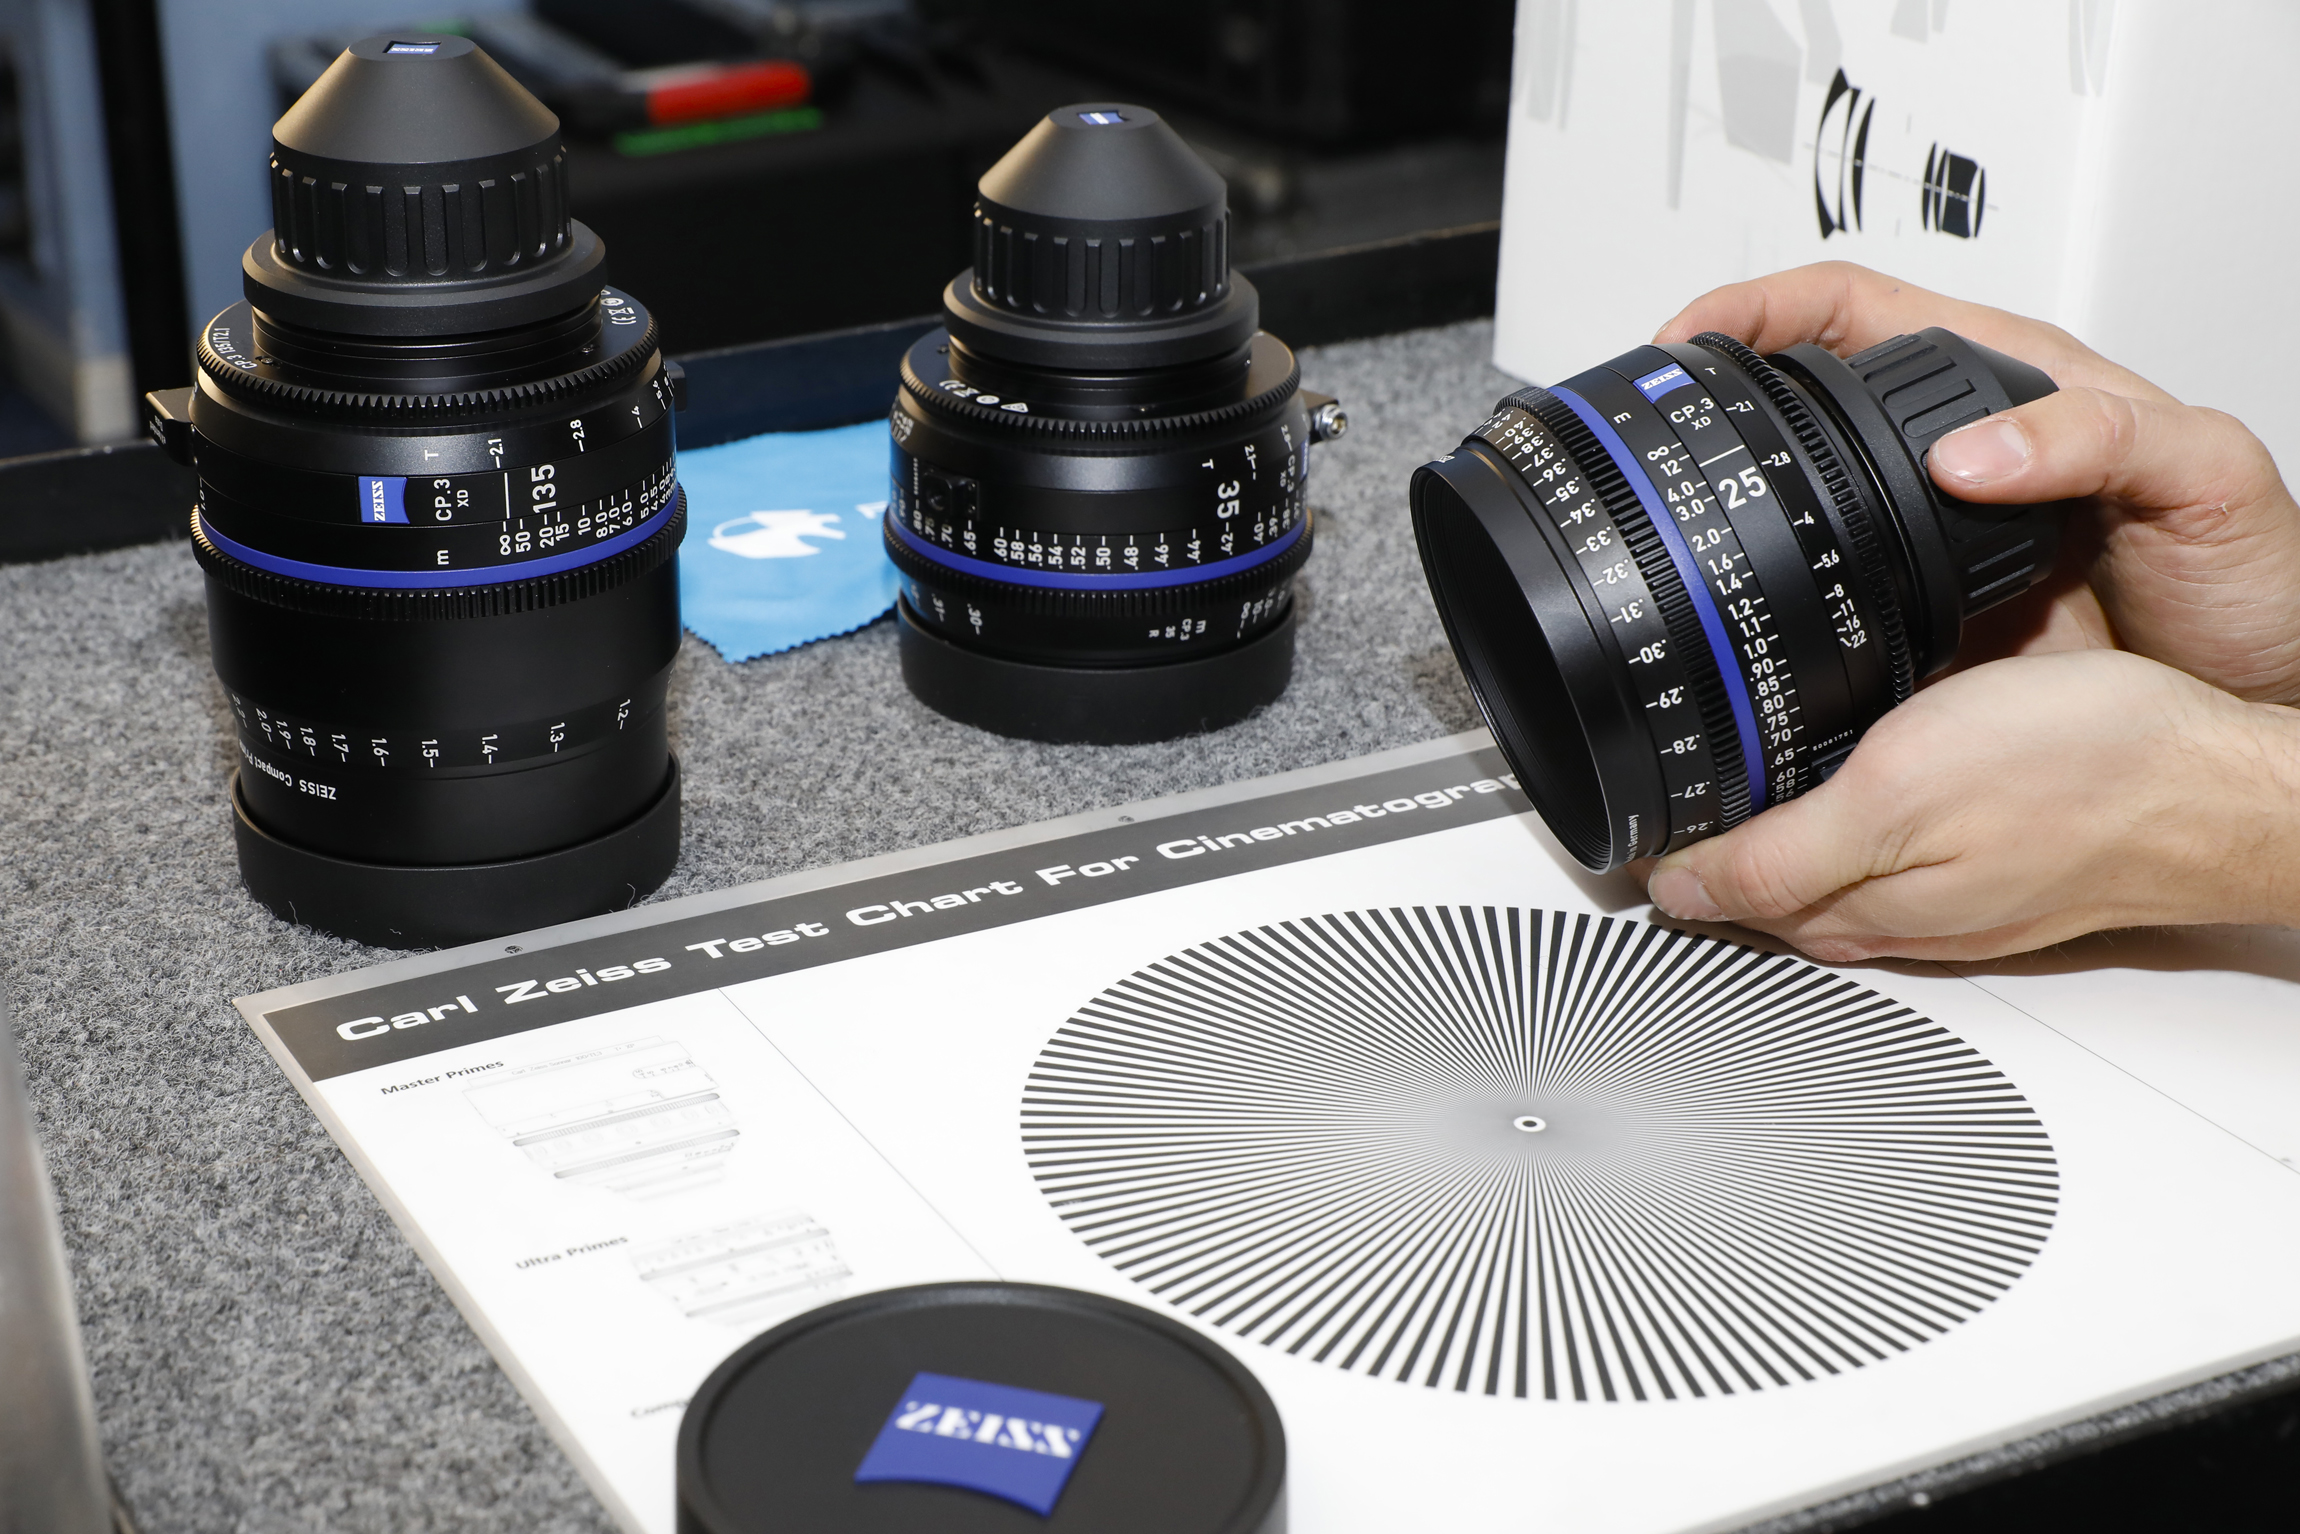 ZEISS CP.3 XD 25MM T2.1